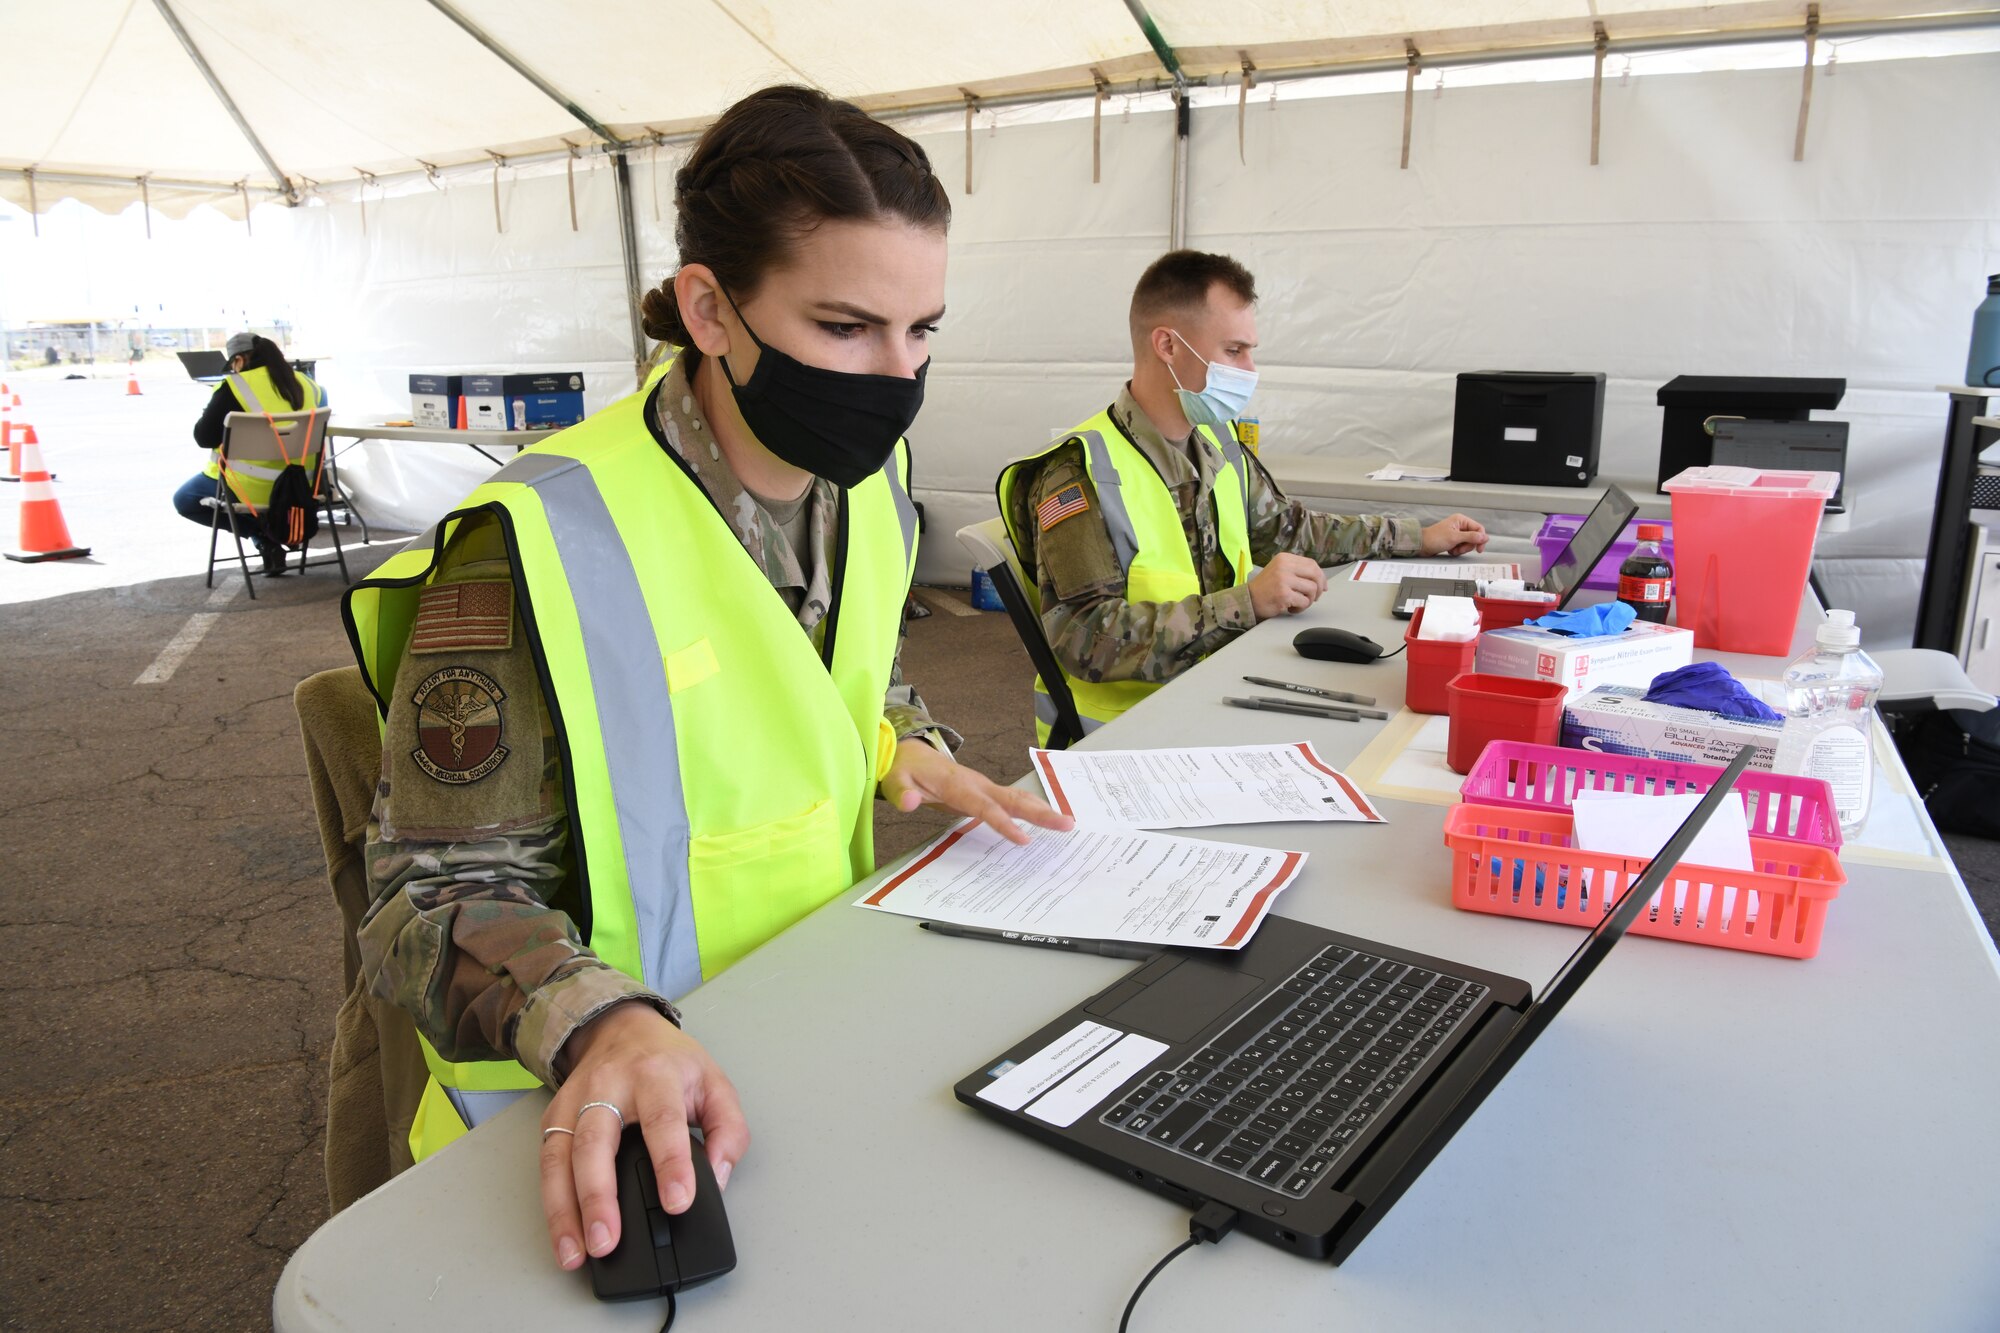 Reserve Airman Senior Airman Danielle Ippolito, 944th Medical Squadron nurse, and Army Guard Specialist Karston Gardner, Combat Medic, 856th Military Police Company, input information into the COVID-19 tracker for the Salt River Pima-Maricopa Indian Community residents they have vaccinated at the Salt-River Point of Dispensing site, March 26, 2021. As part of the Arizona National Guard Task Force Medical, servicemembers are augmenting vaccination sites for communities with low staffing and a high demand.